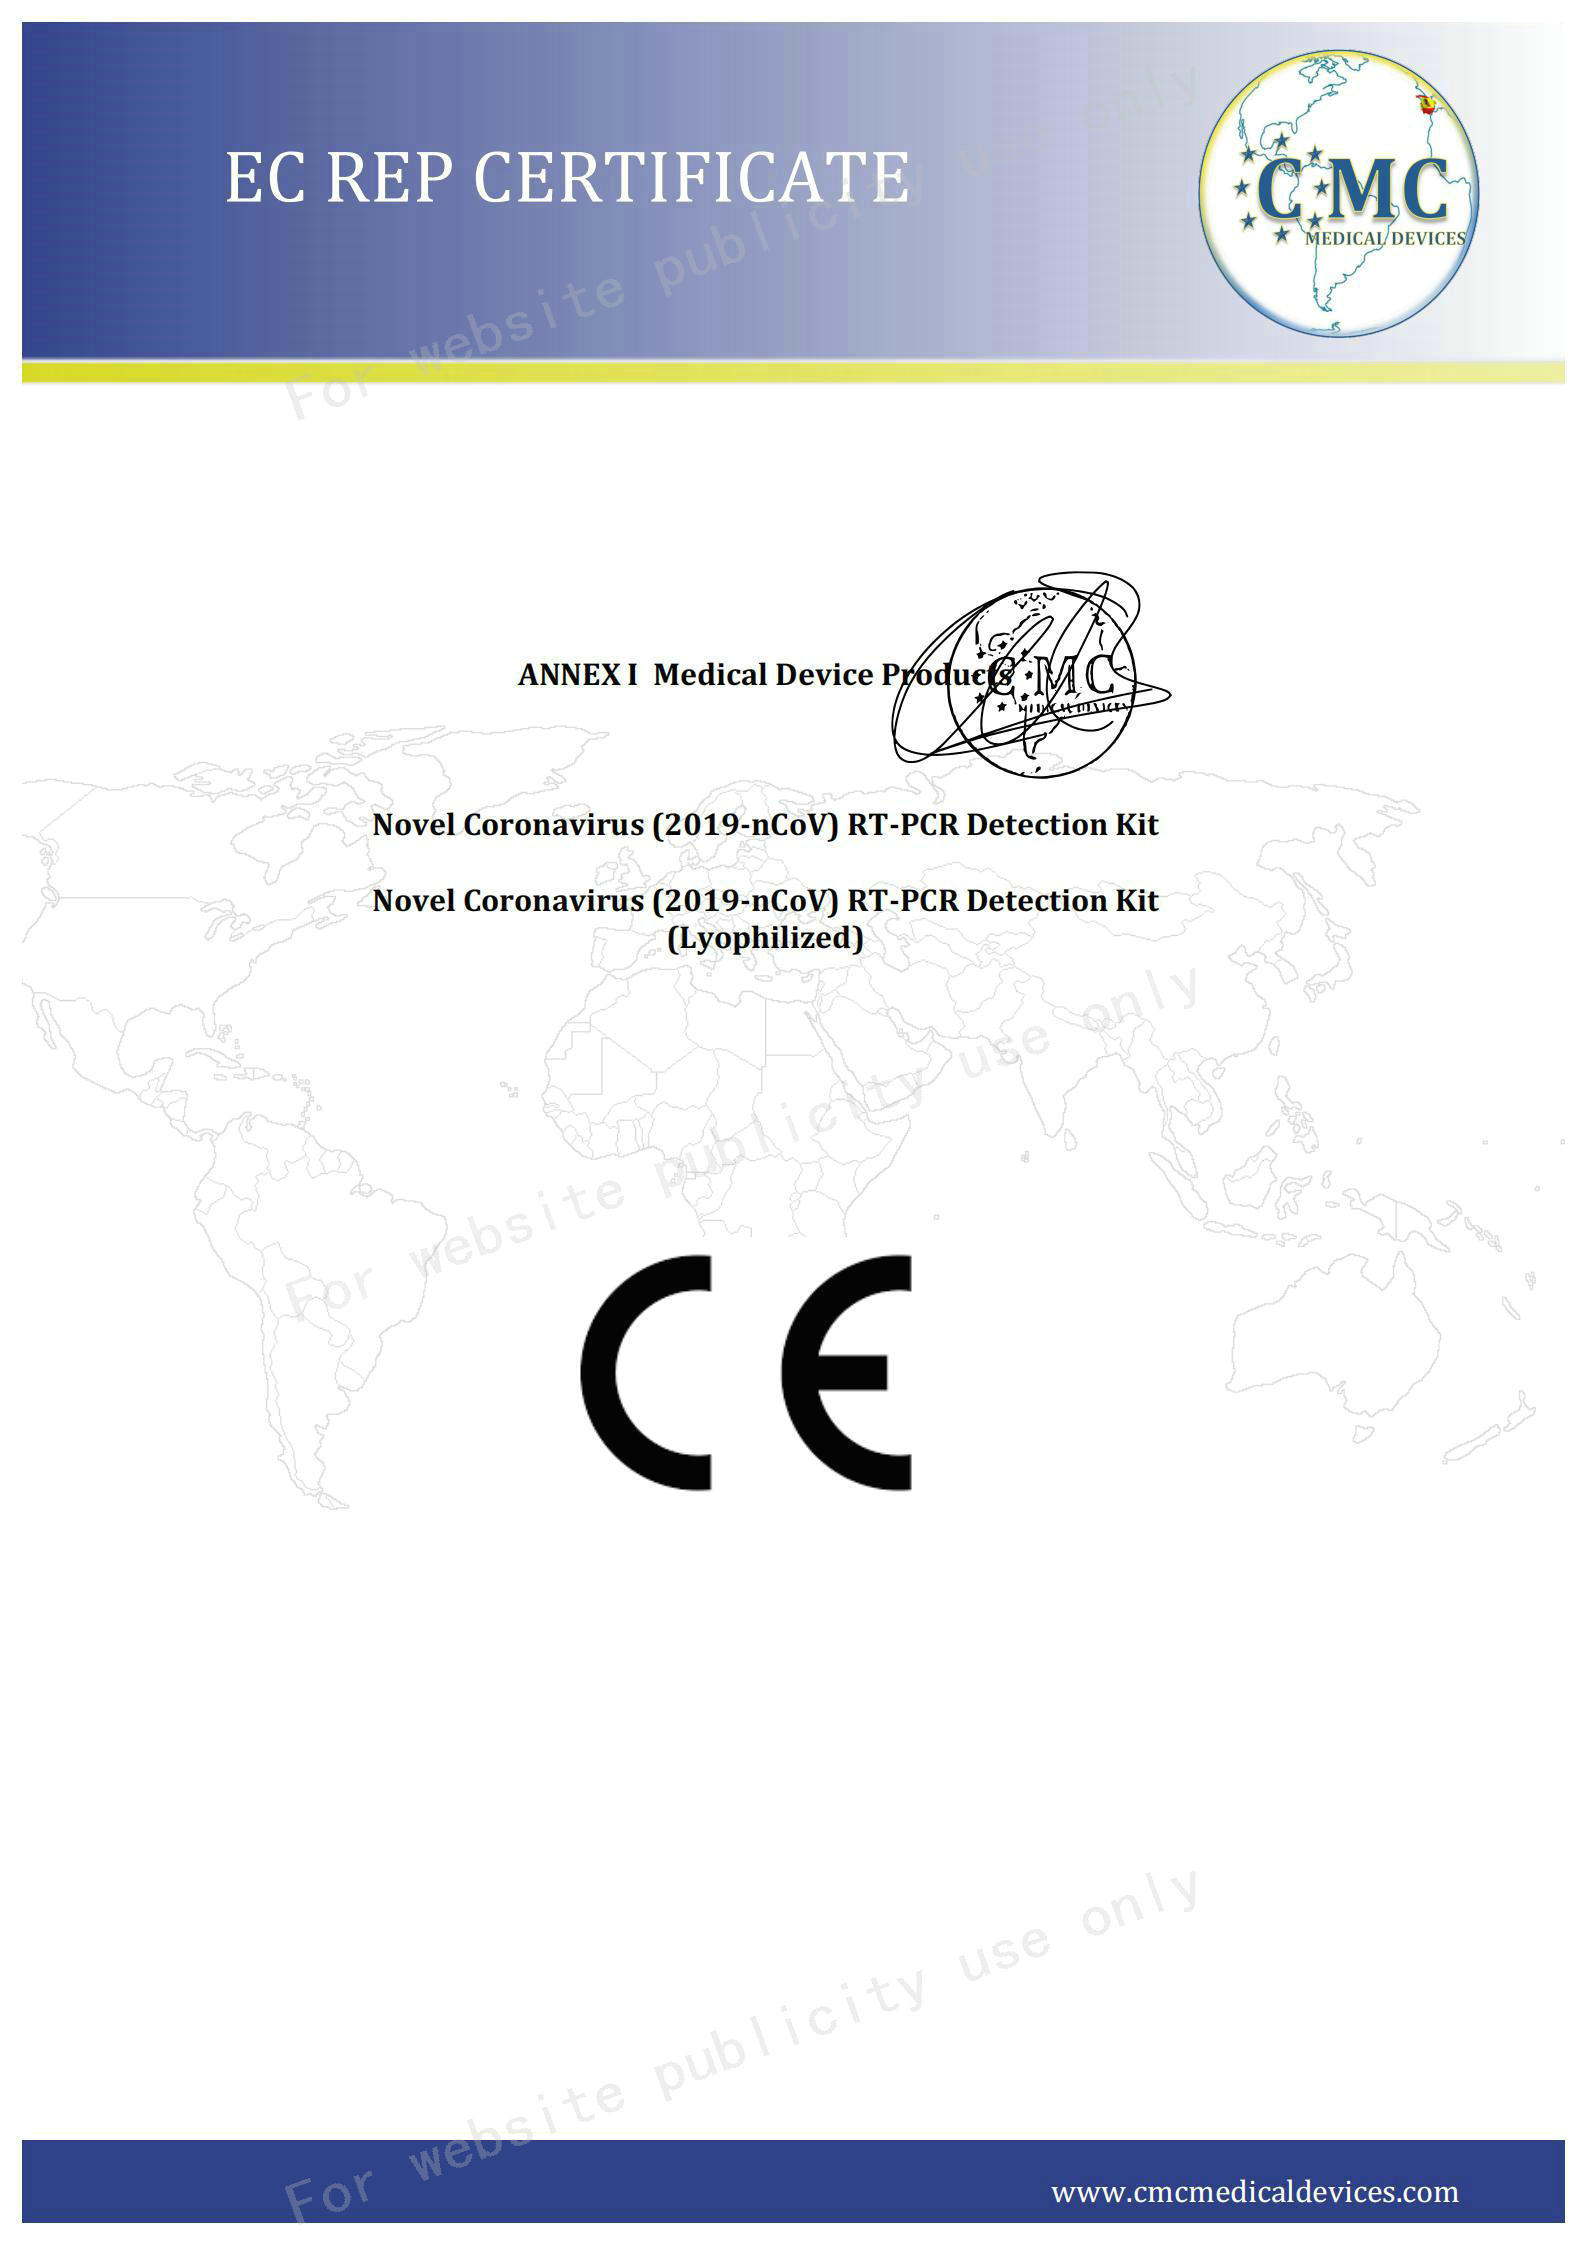 02 CE certificate page2